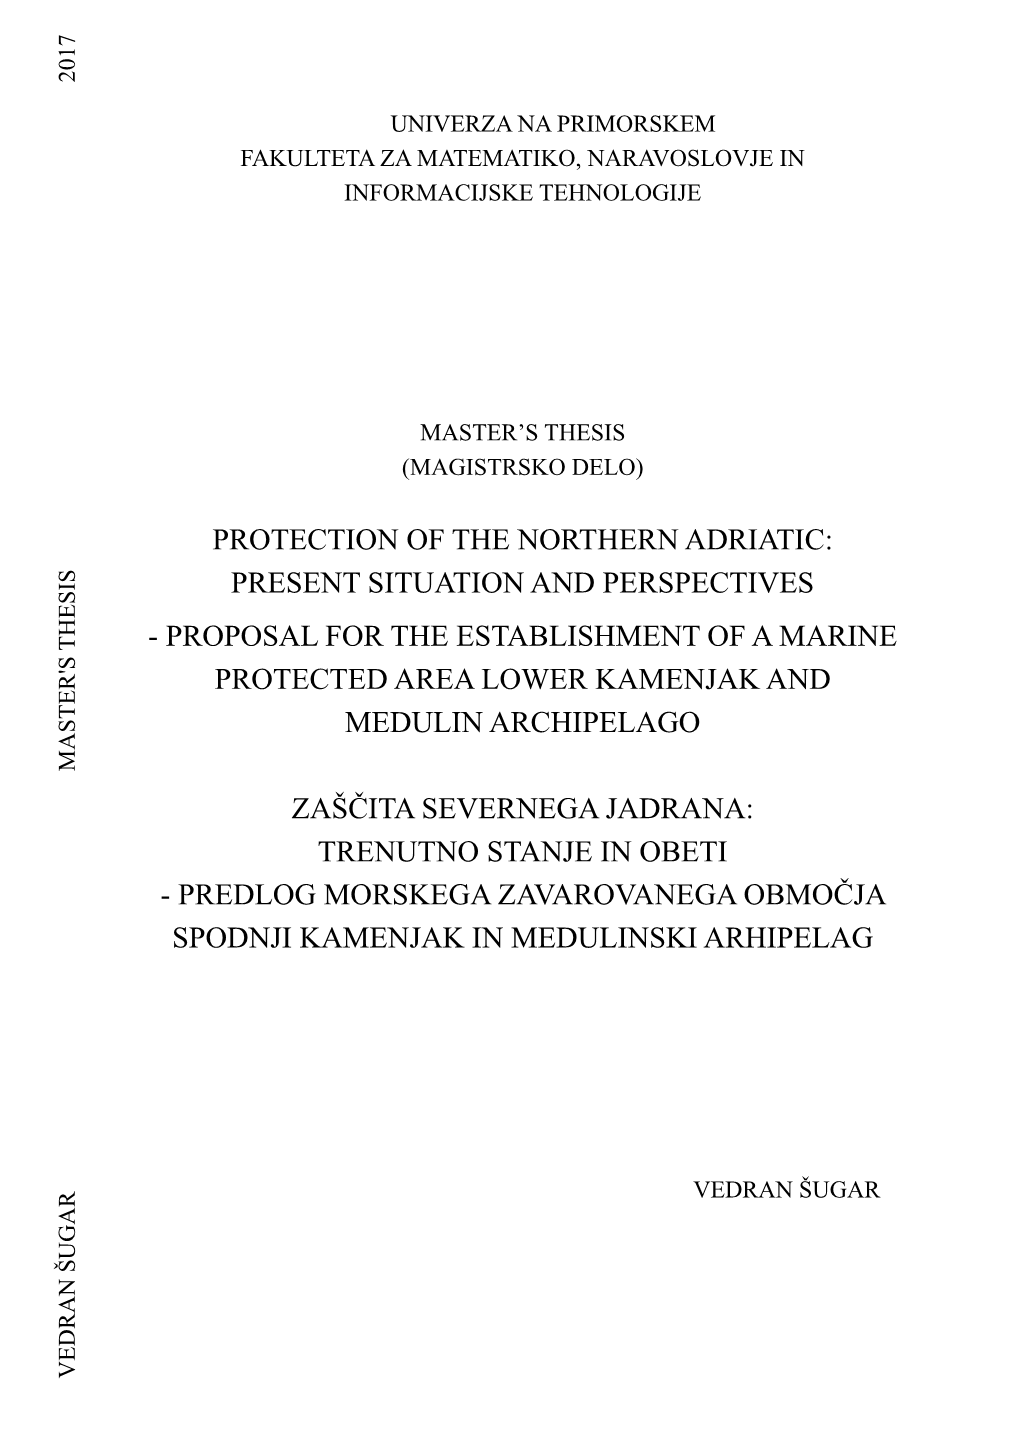 Protection of the Northern Adriatic